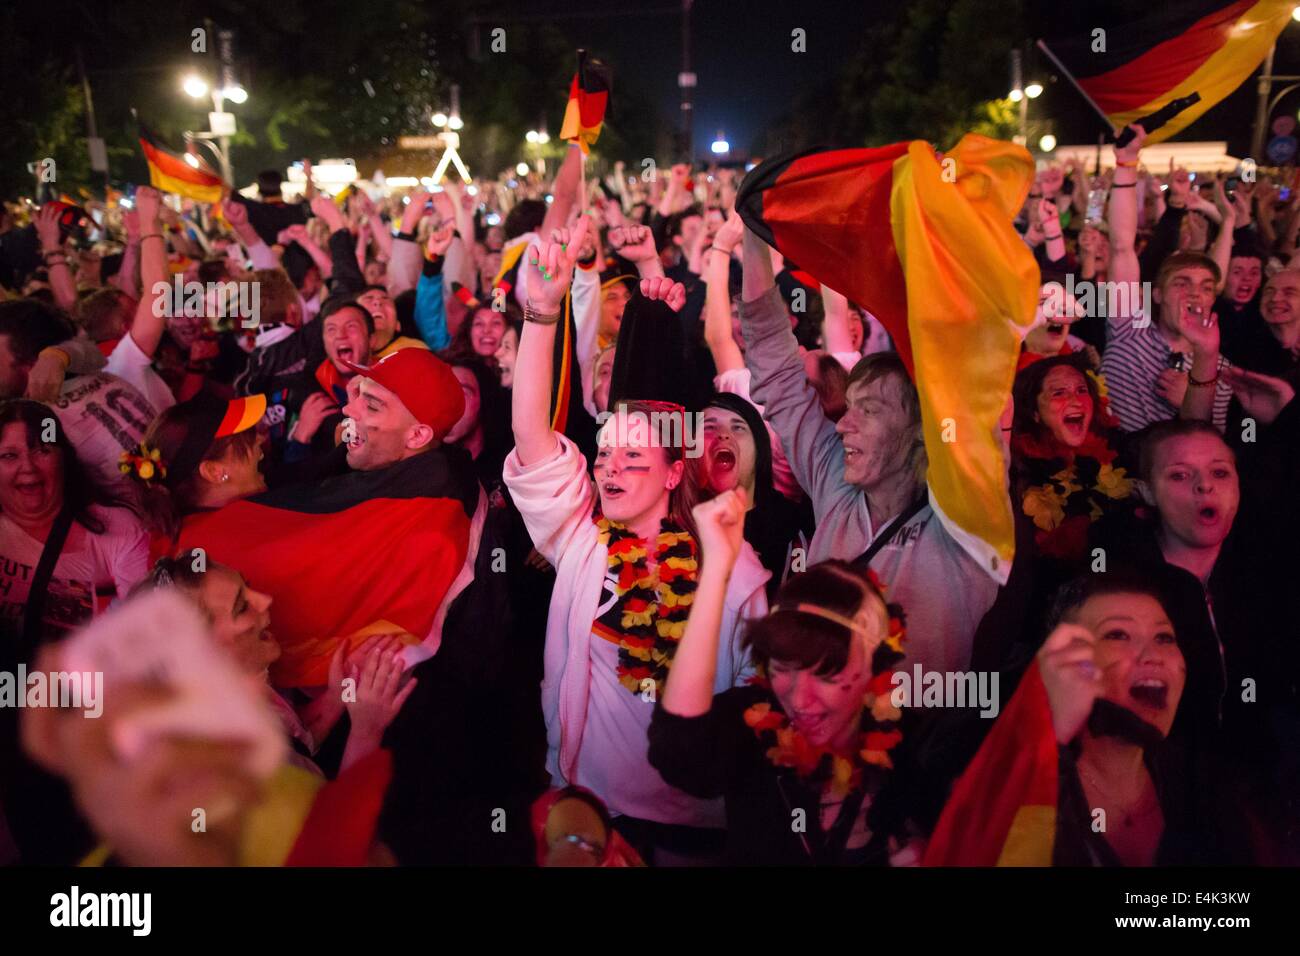 Berlin, Germany. 13th July, 2014. Spectators cheer during the FIFA World Cup 2014 Final match between Germany and Argentina in the fan mile at the Brandenburg Gate in Berlin, Germany, 13 July 2014. Germany won 1-0 and became World Champion. Photo: Maja Hitij/dpa/Alamy Live News Stock Photo